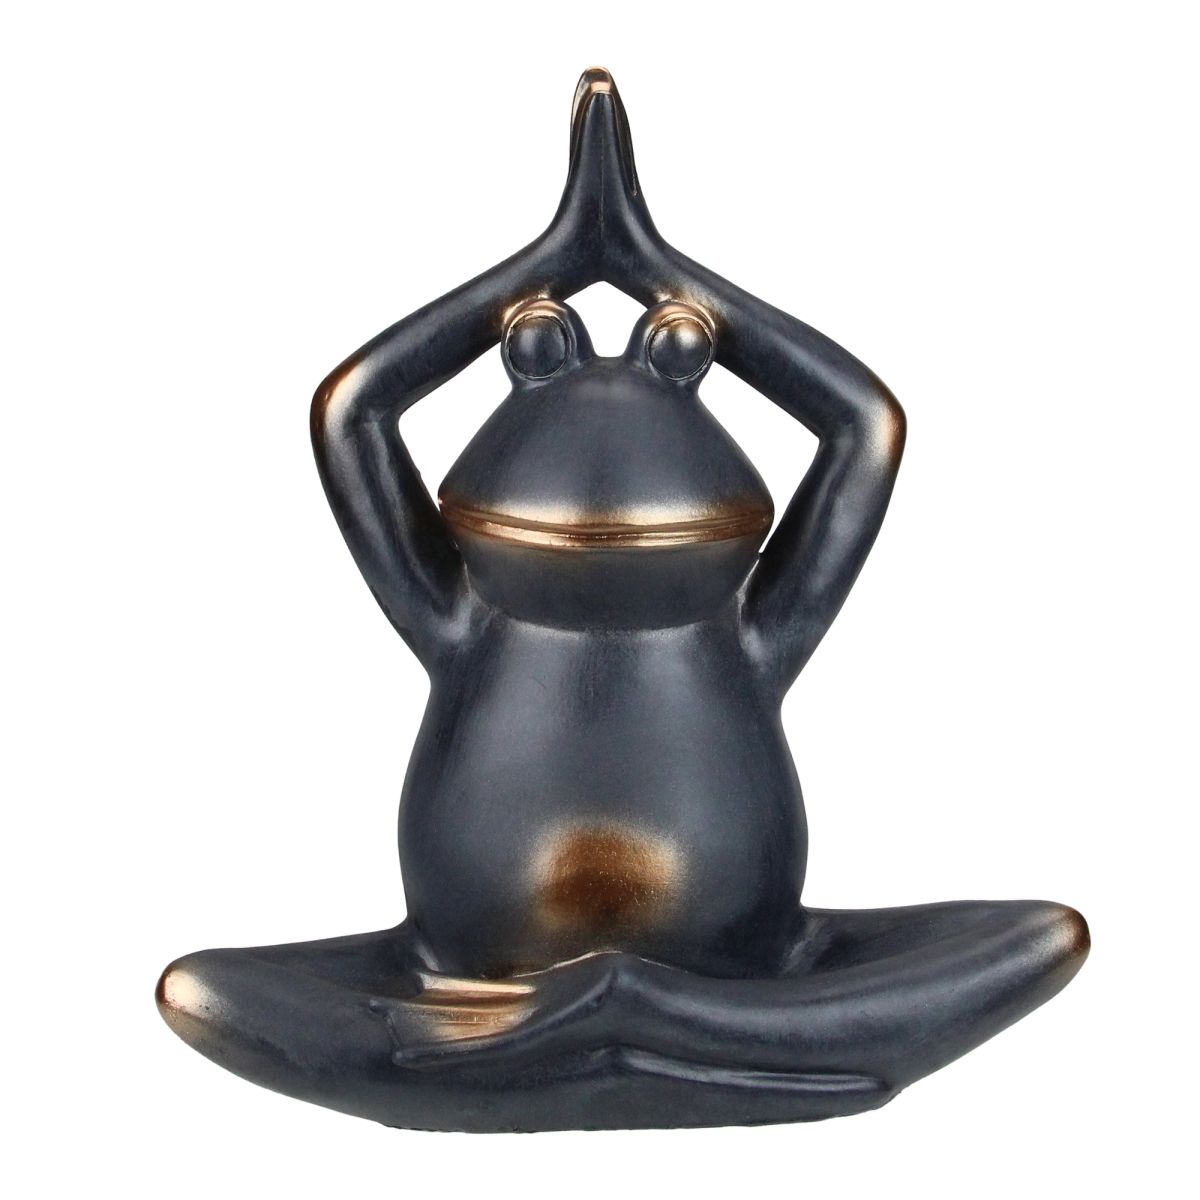 33377619 11.75 In. Frog Sitting In A Pleasant Pose Yoga Position Garden Statue